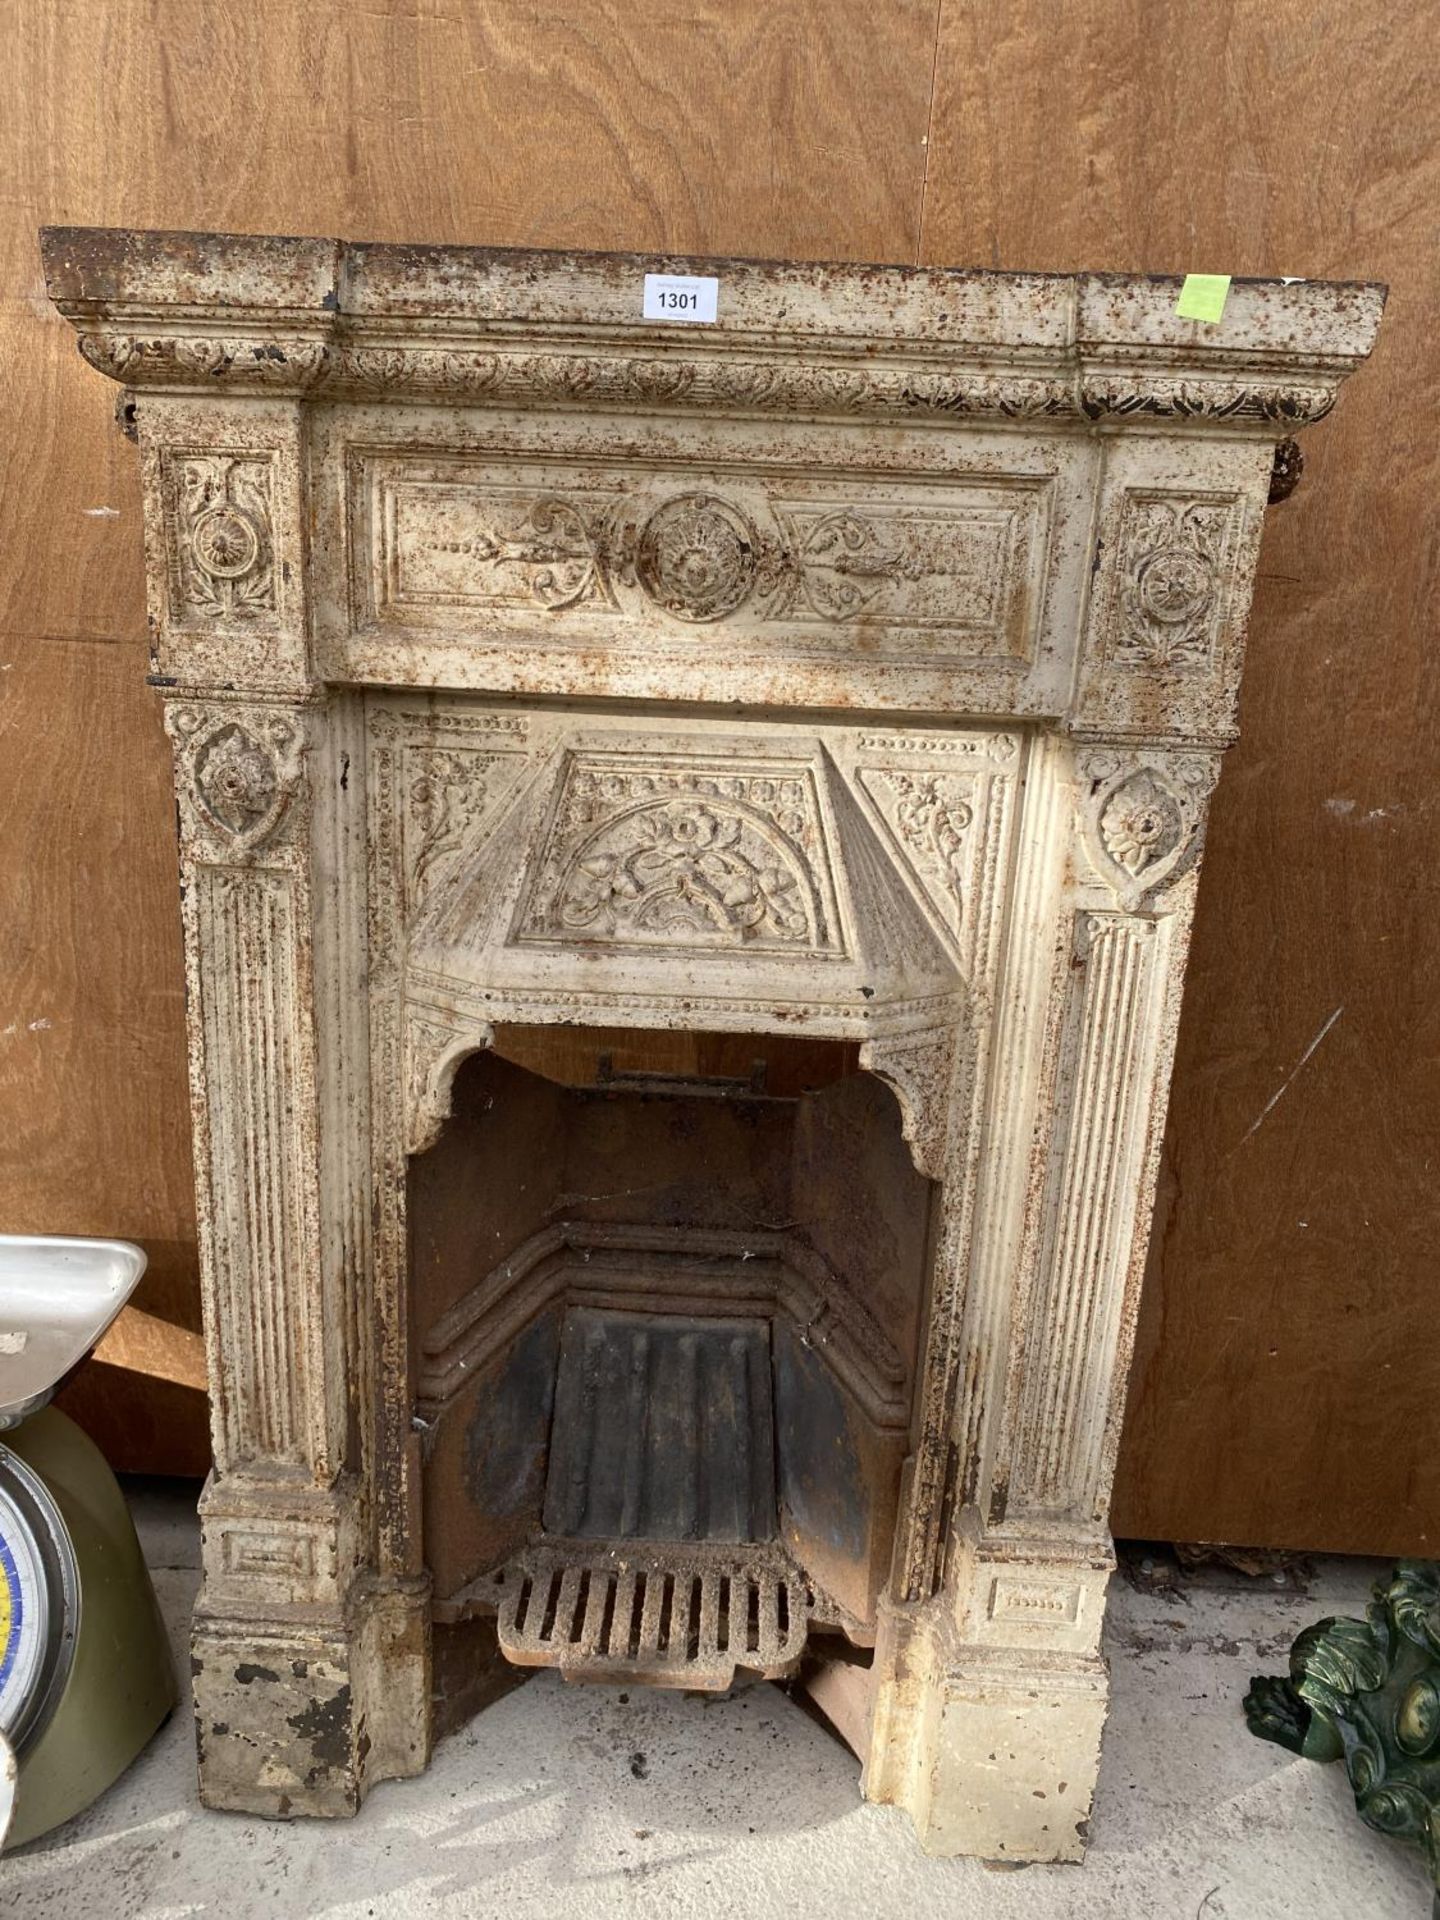 A VINTAGE CAST IRON FIRE PLACE WITH FIRE GRATE